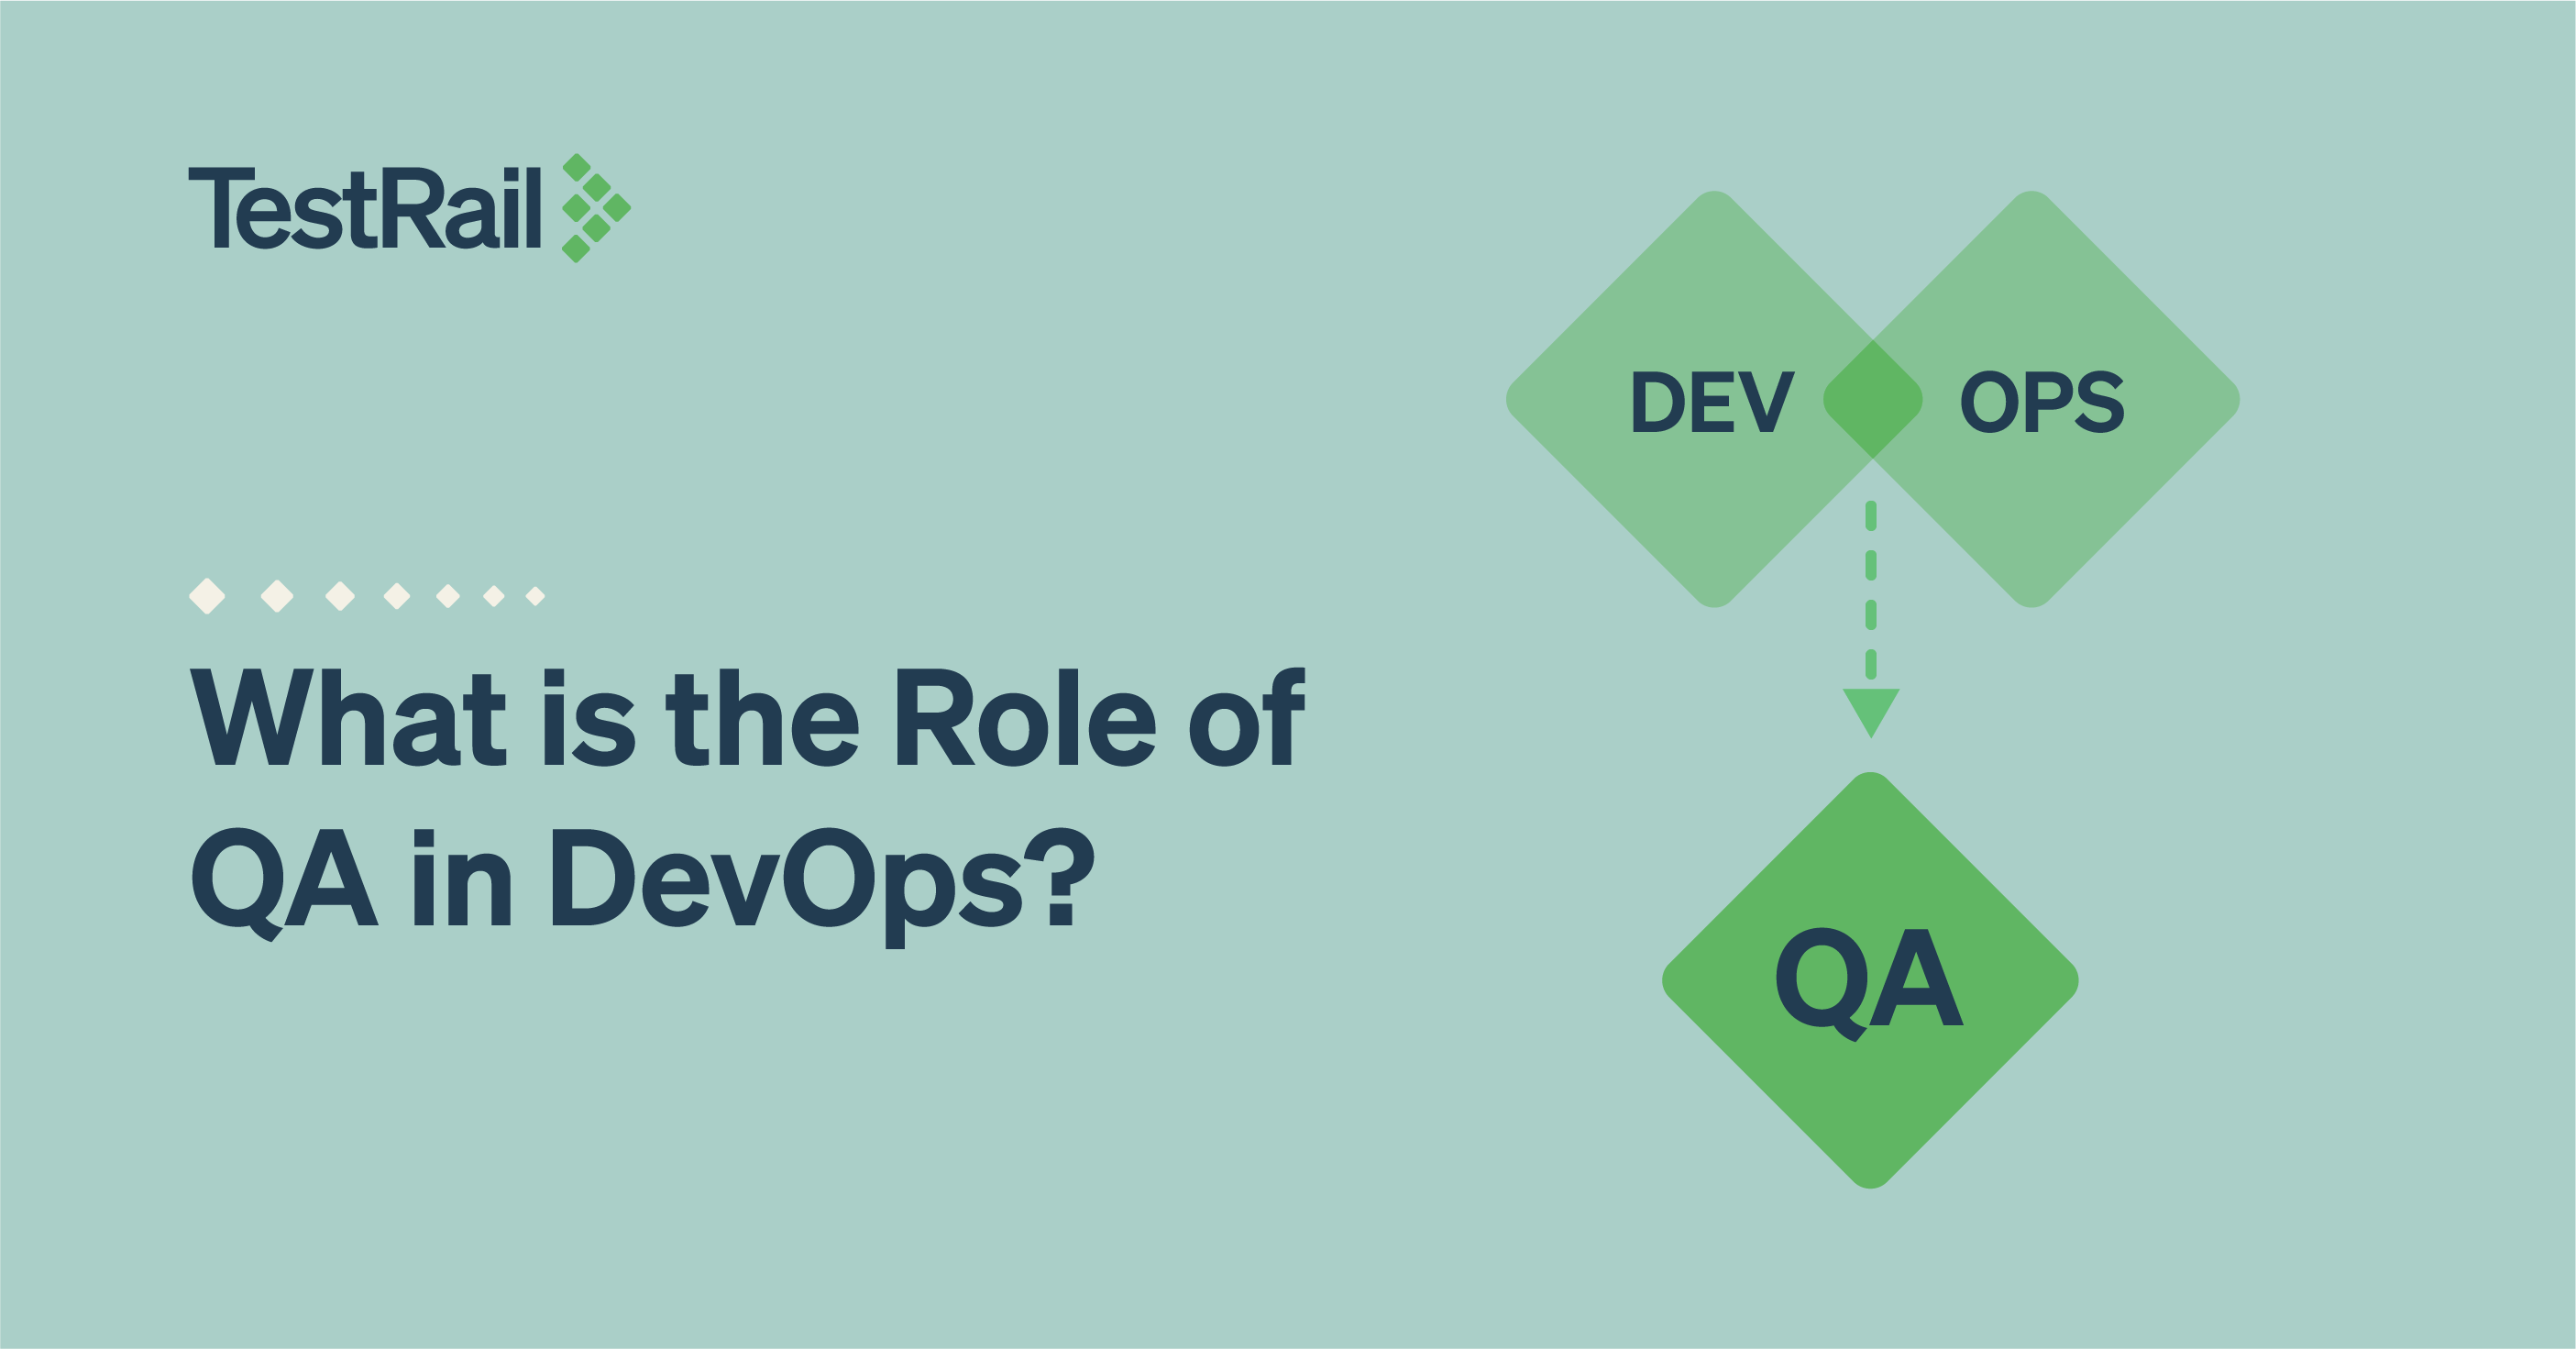 What is the Role of QA in DevOps?